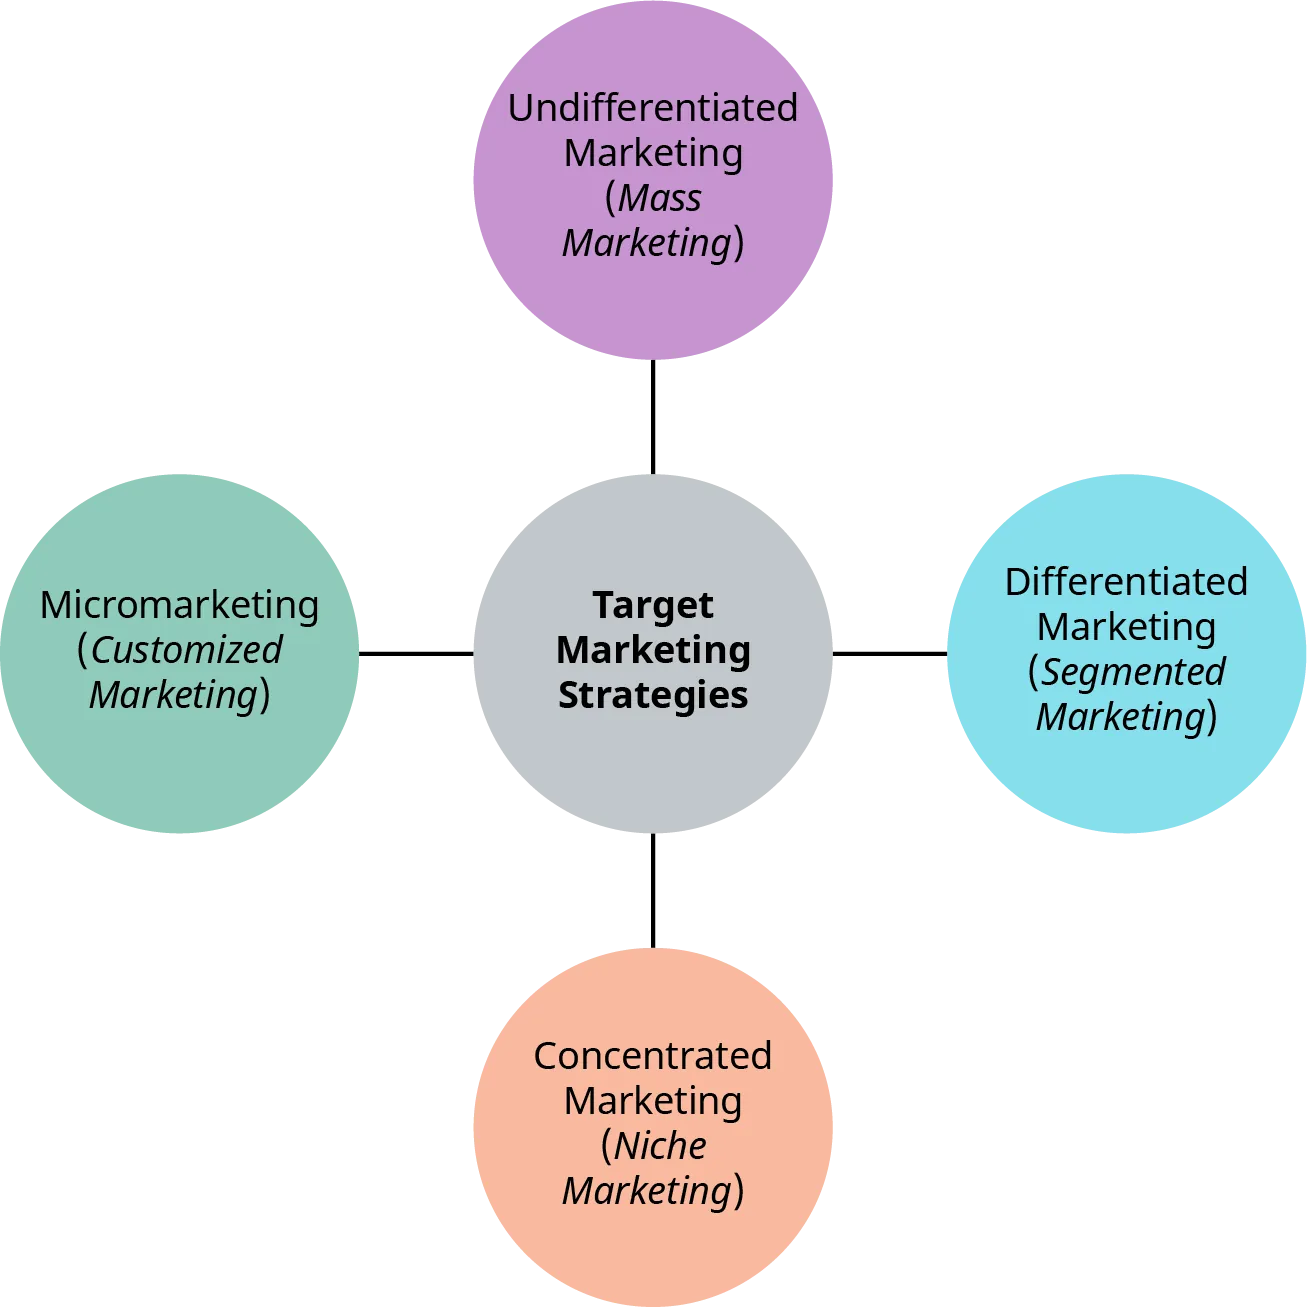 The different target marketing strategies are undifferentiated marketing (or mass marketing), differentiated marketing (or segmented marketing), concentrated marketing (or niche marketing), and micromarketing (or customized marketing.